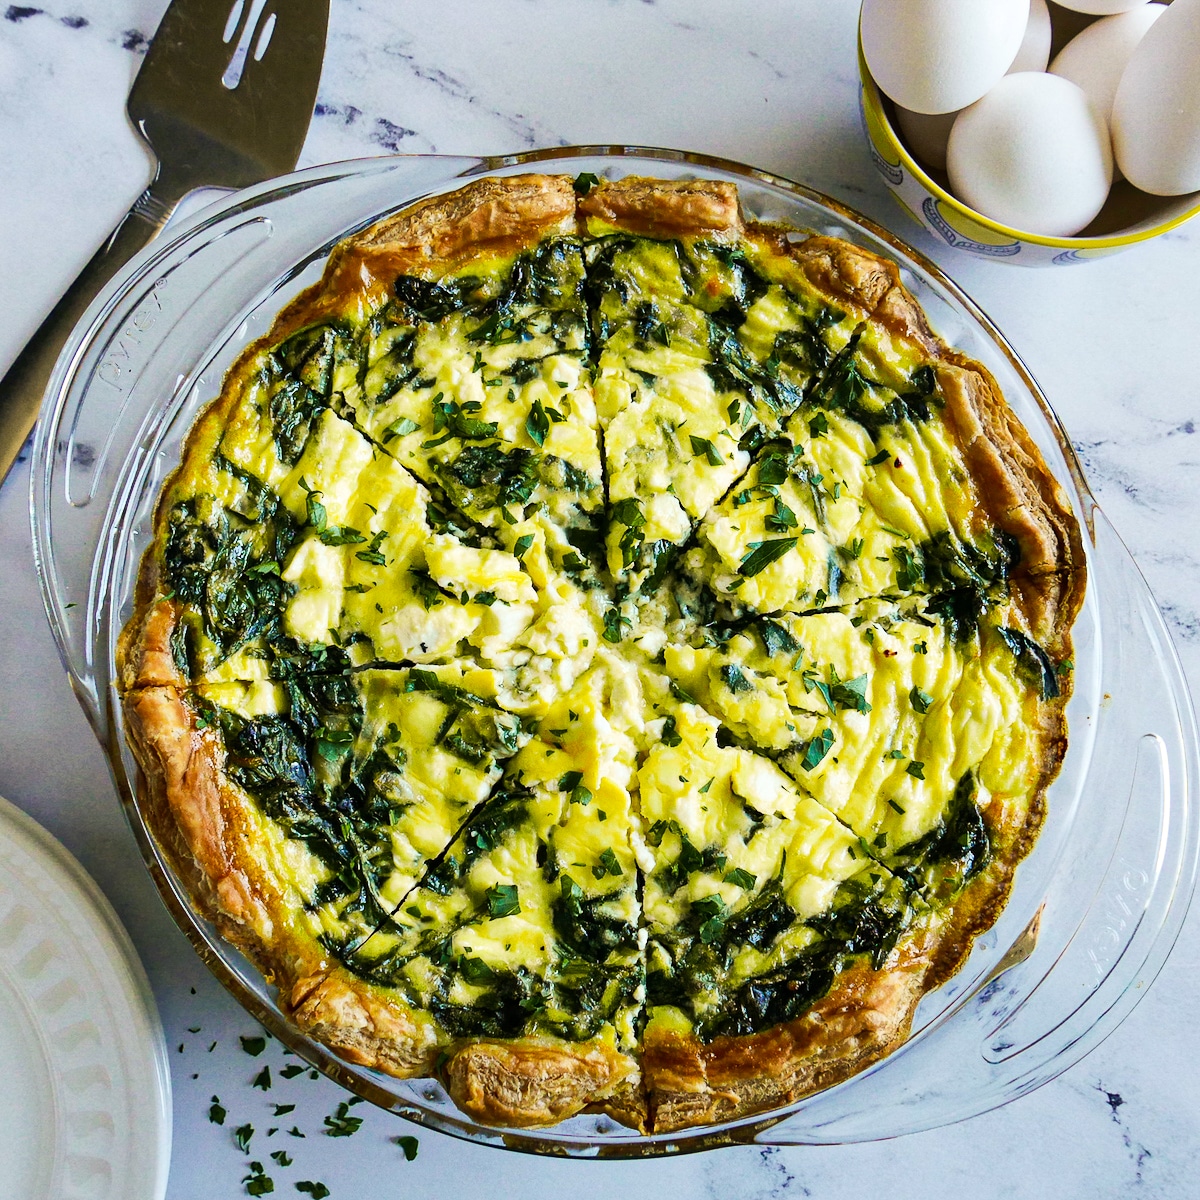 Spinach quiche cut into slices with a bowl of eggs in background.